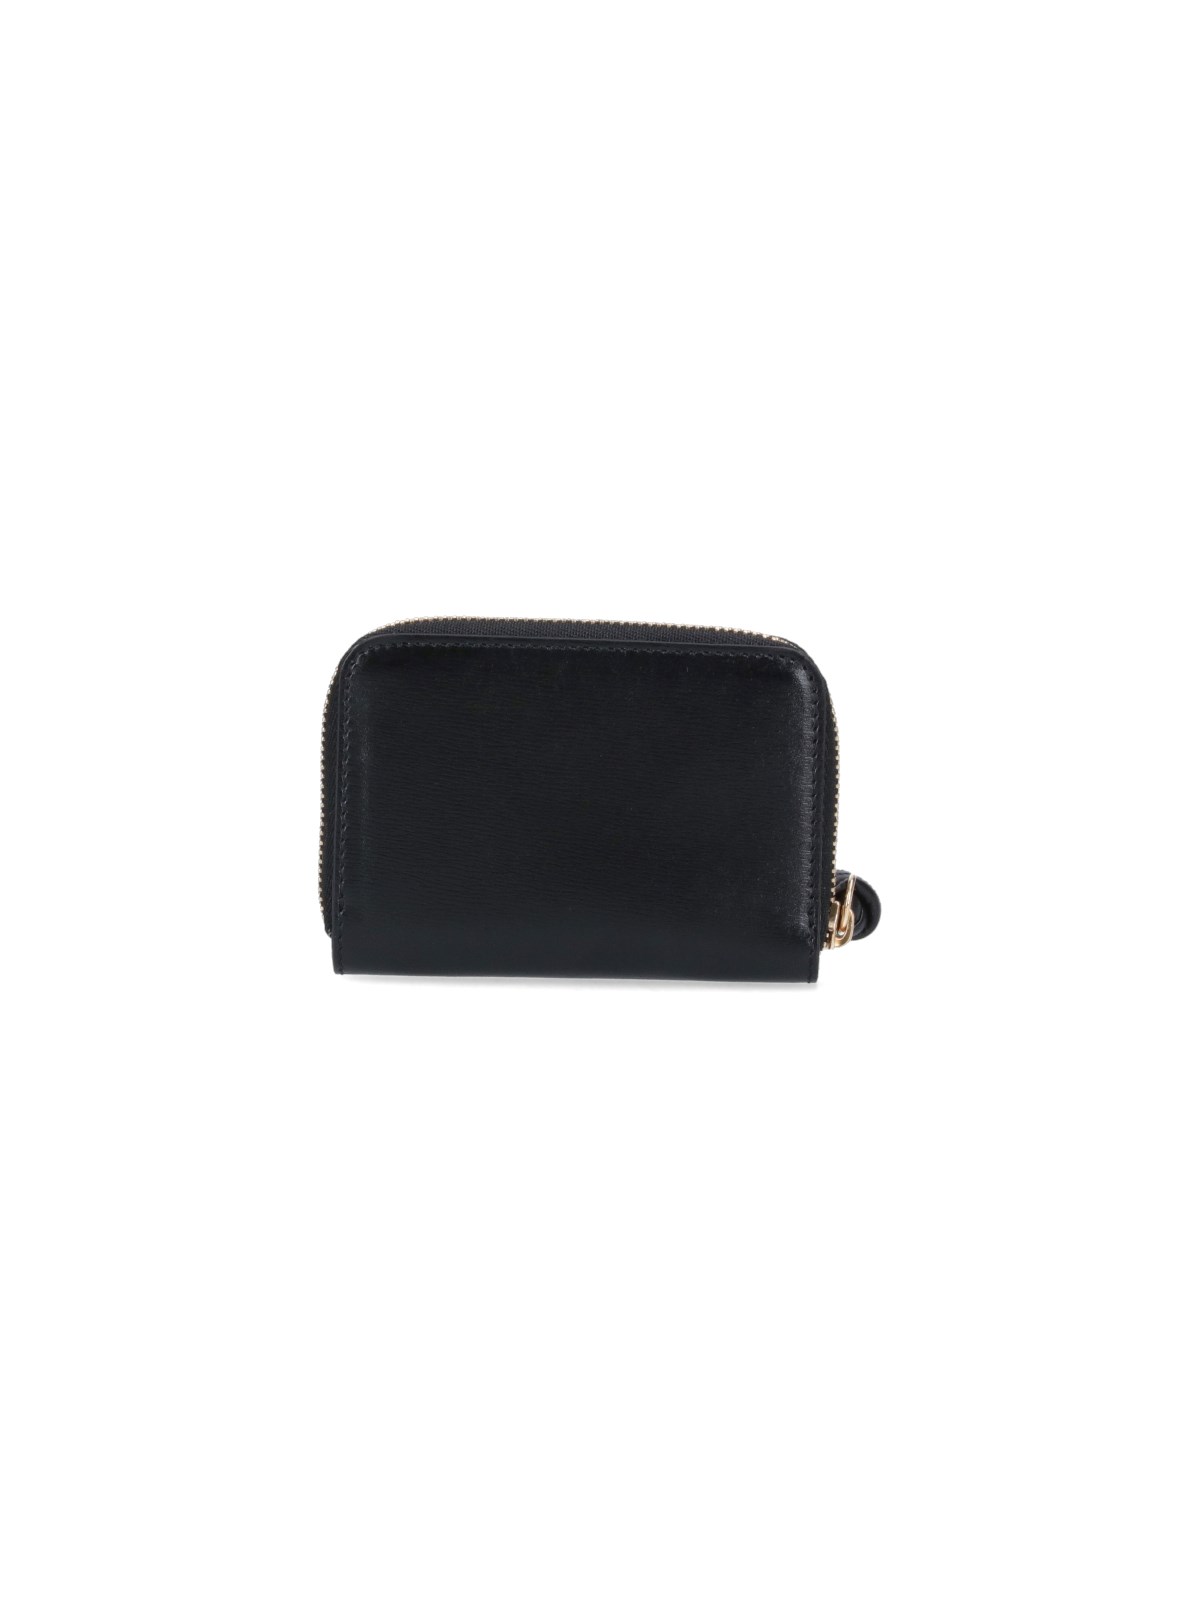 Jil sander Zip-around wallet small available on SUGAR - 128852